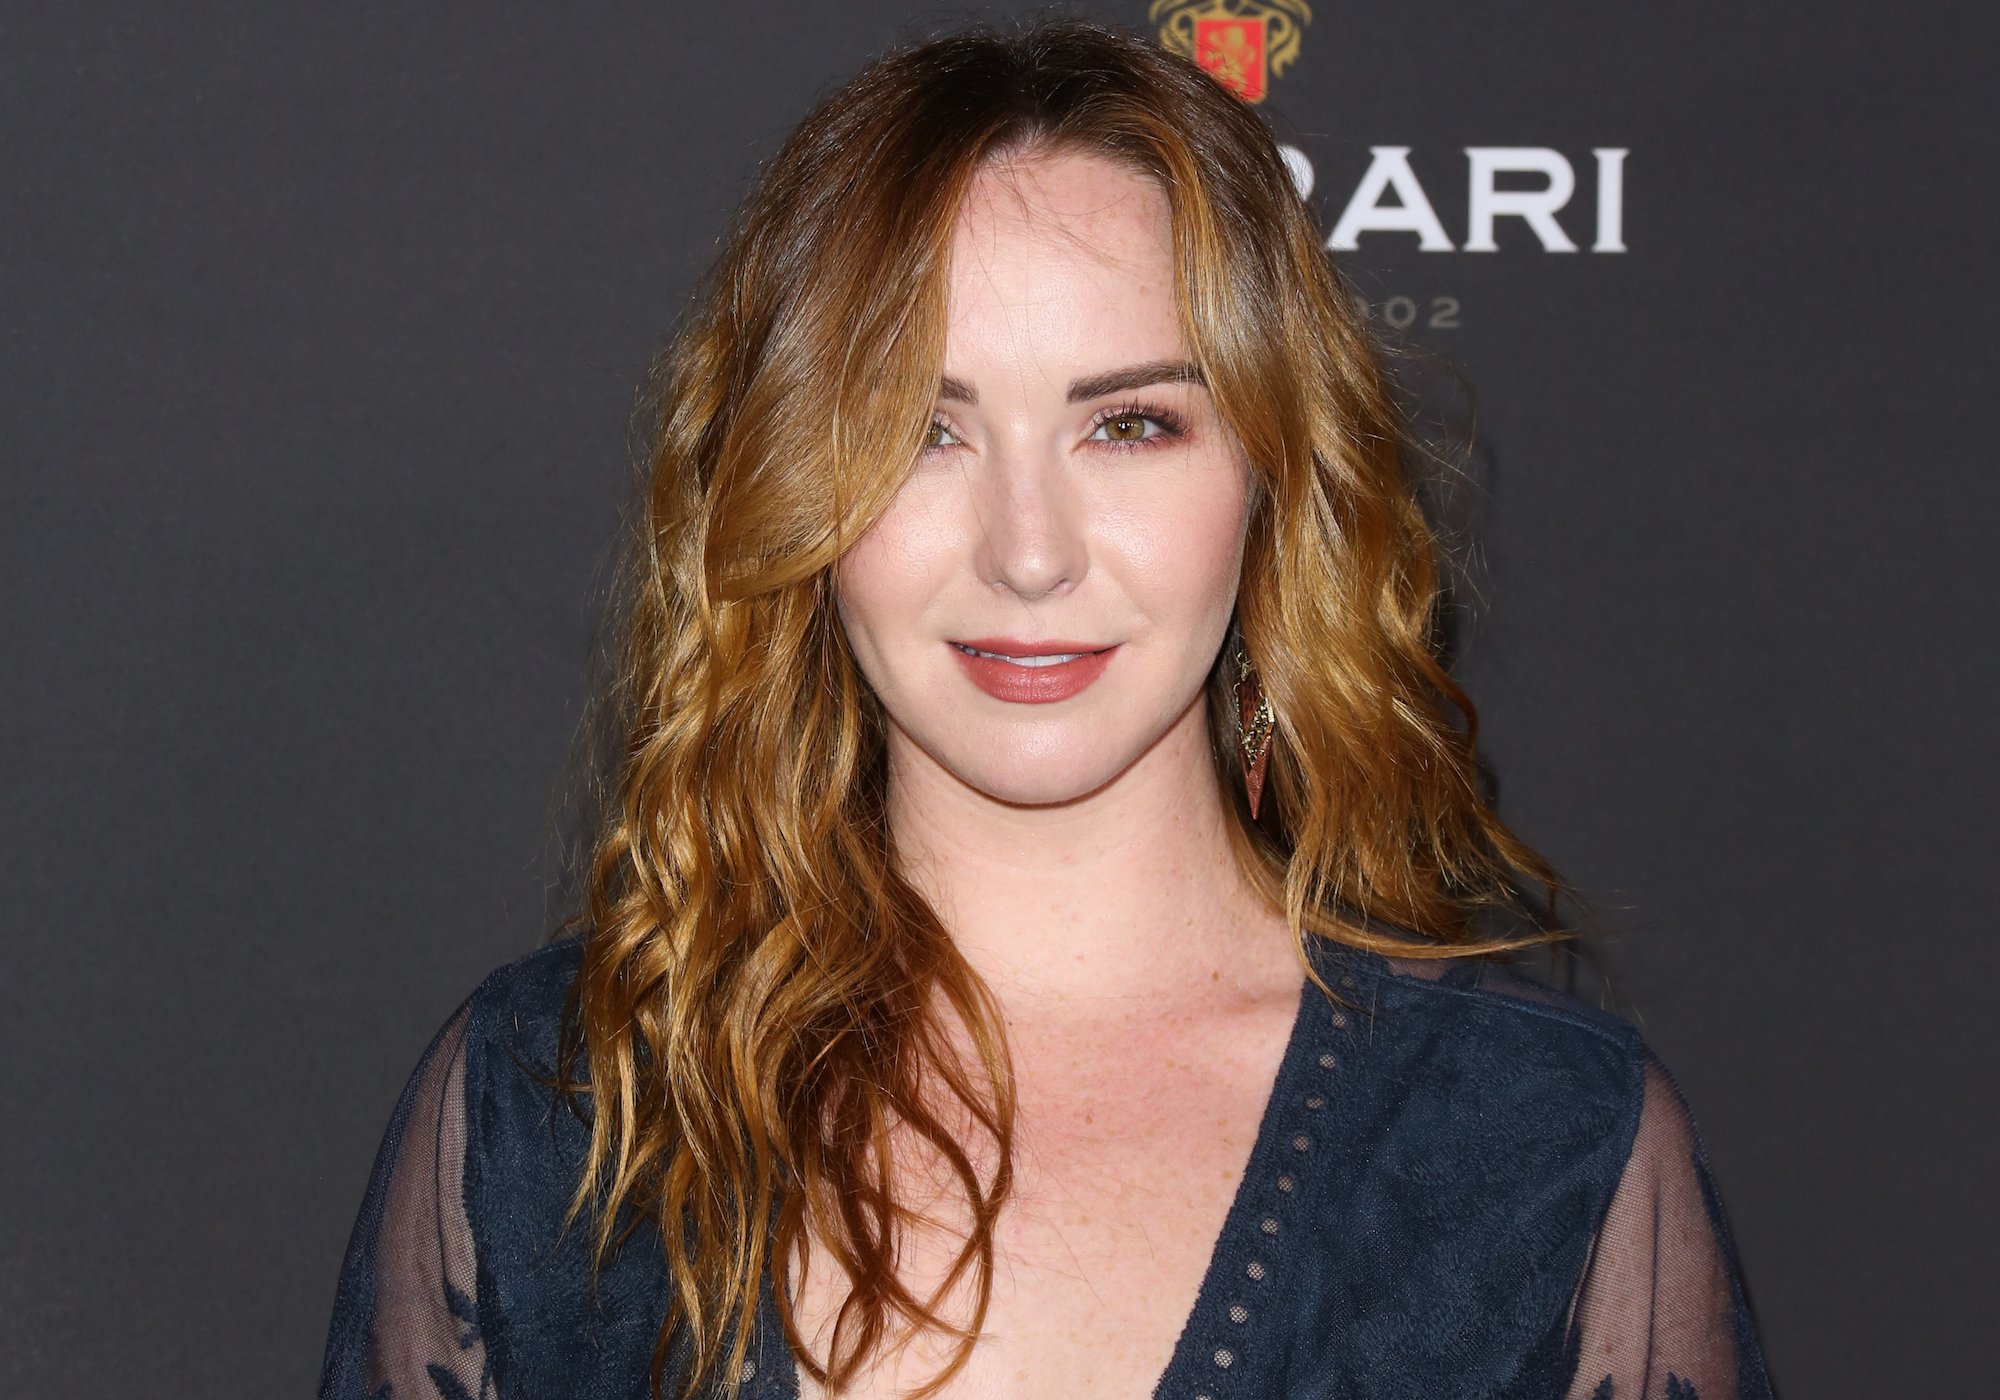 Camryn Grimes smiling in front of a gray background